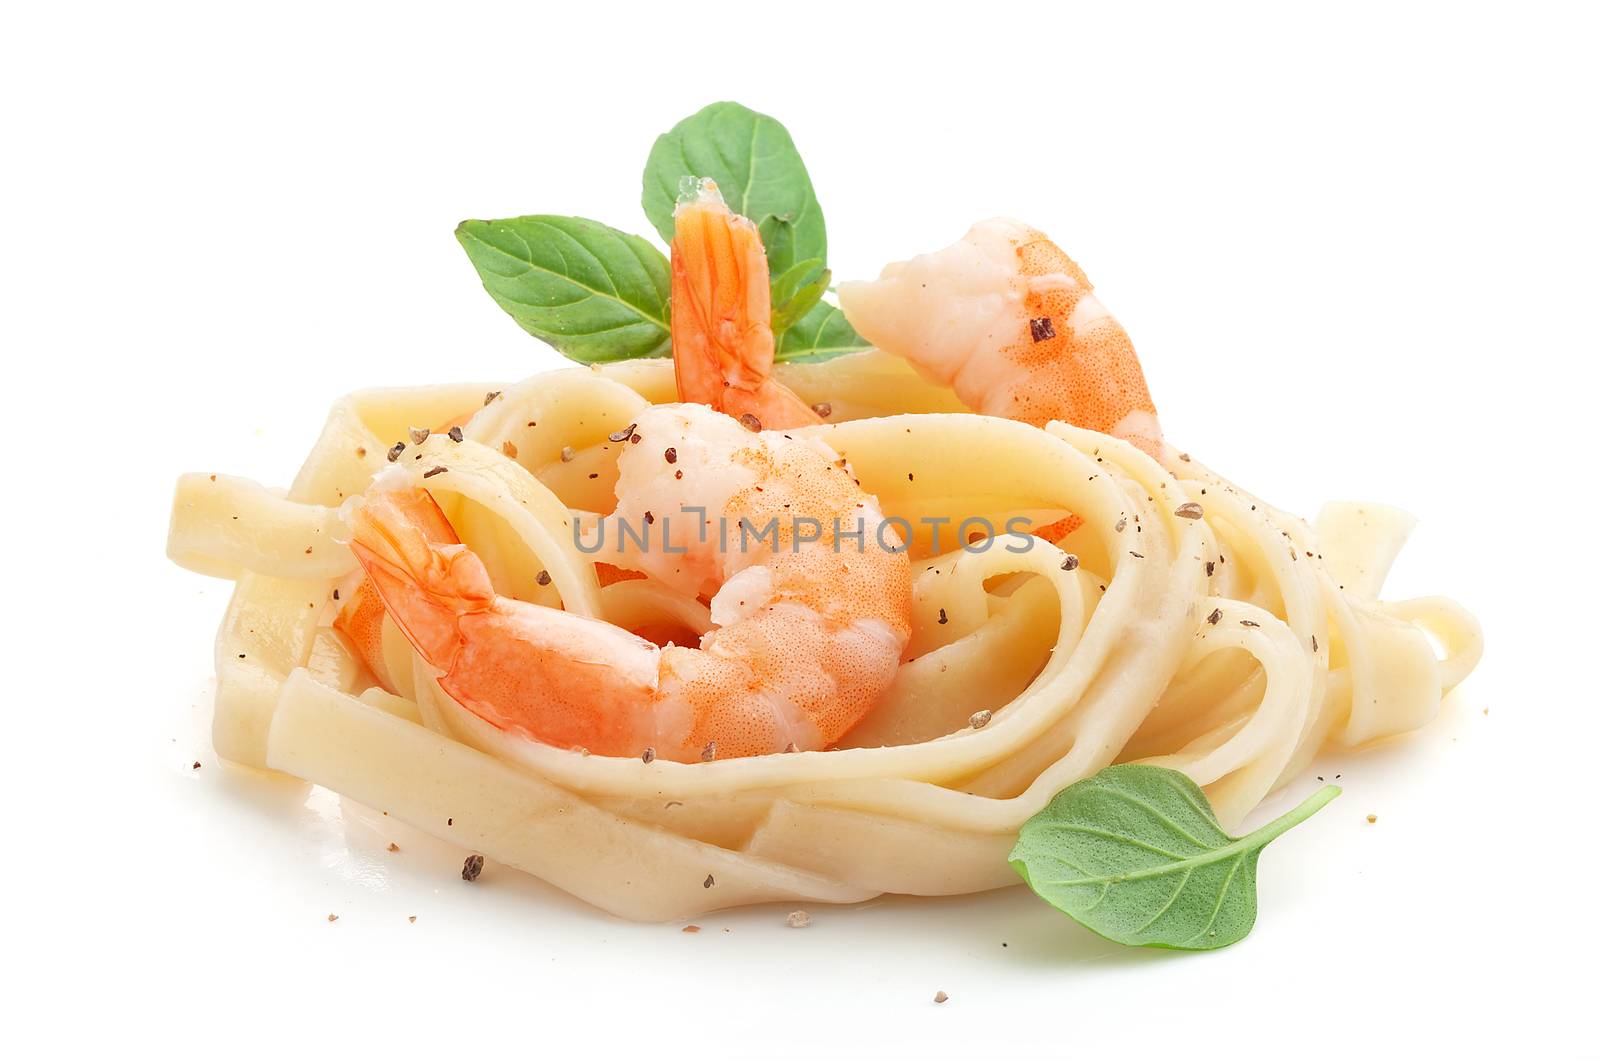 Boiled shrimps with pasta on the plate